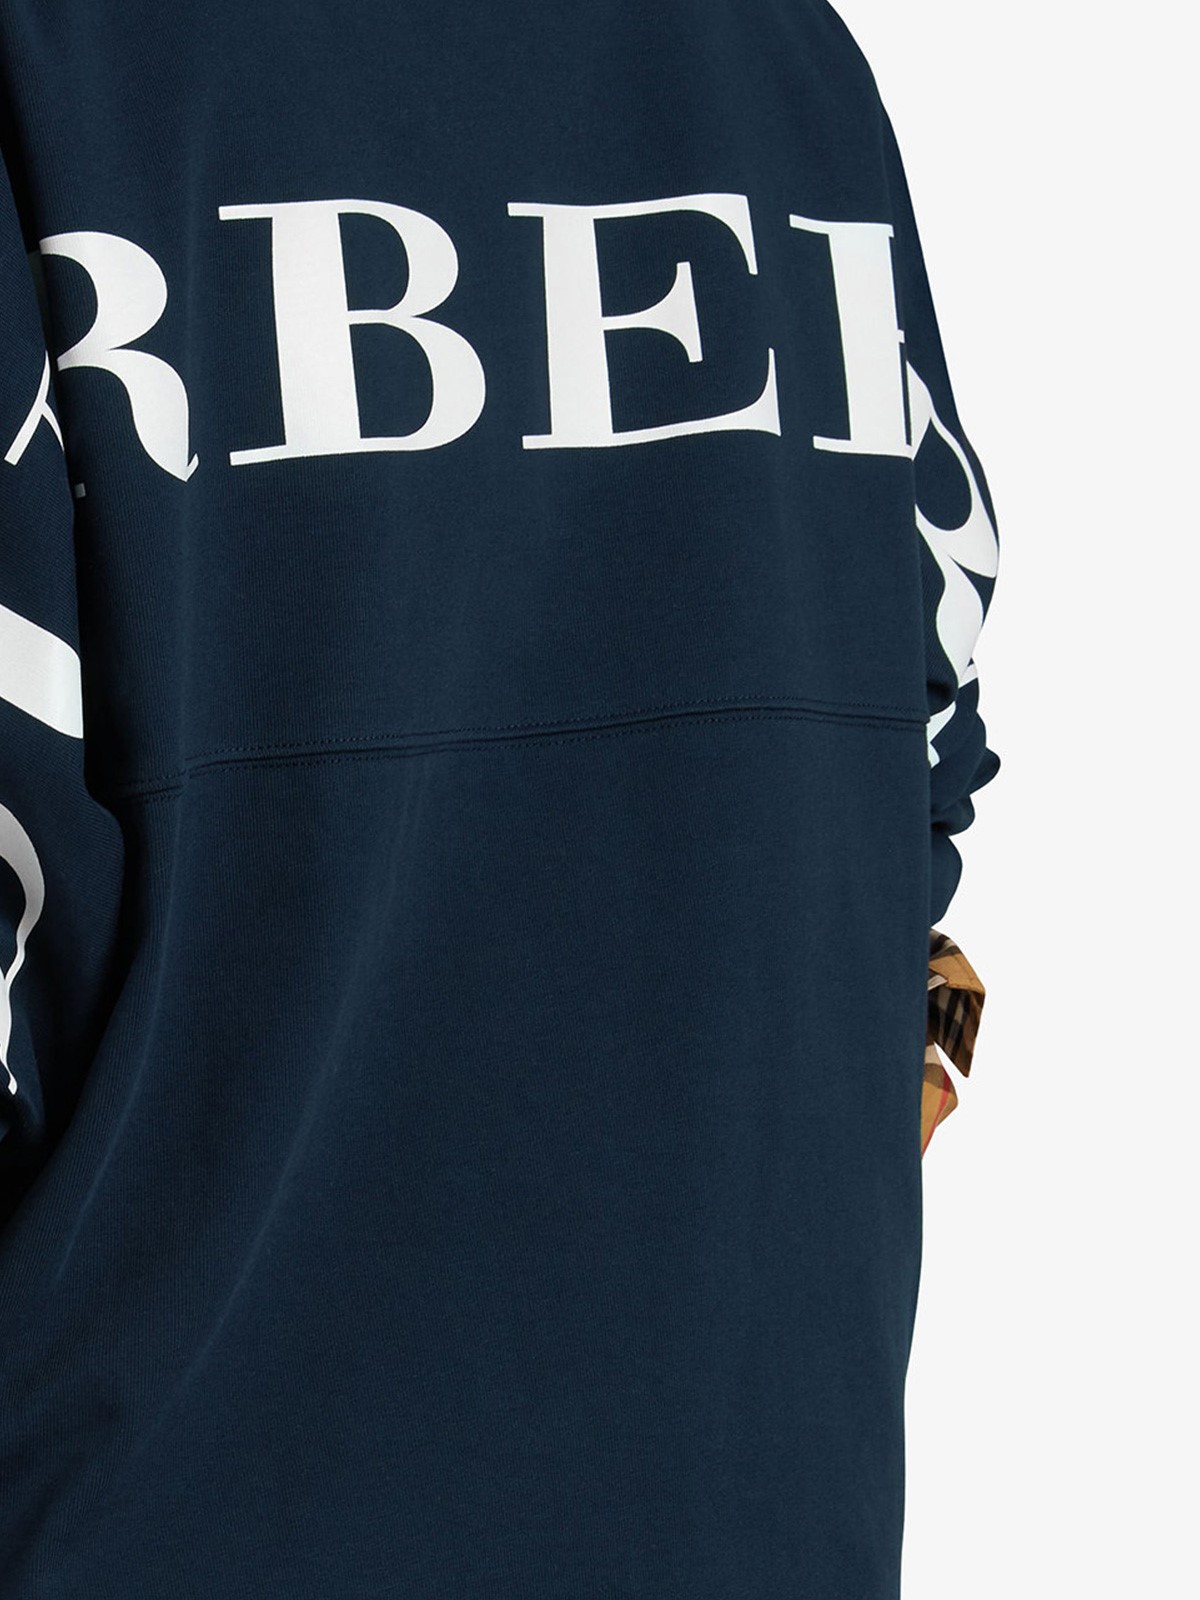 burberry LOGO OVERSIZE SWEATER available on  - 23172